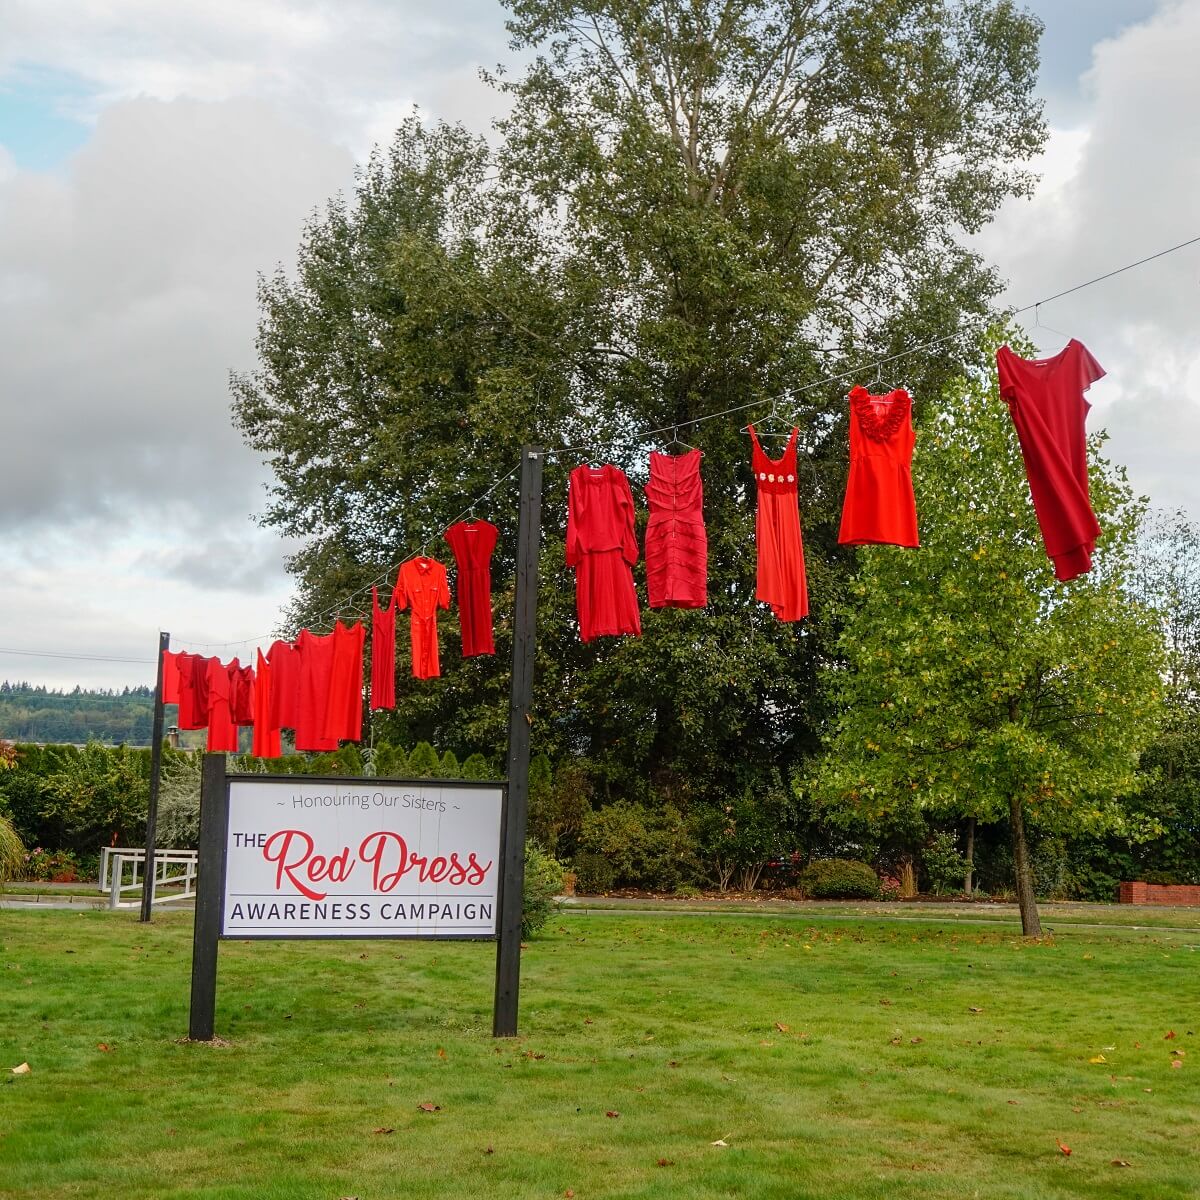 Several red dresses hang on a clothes line near a Red Dress Awareness Campaign sign